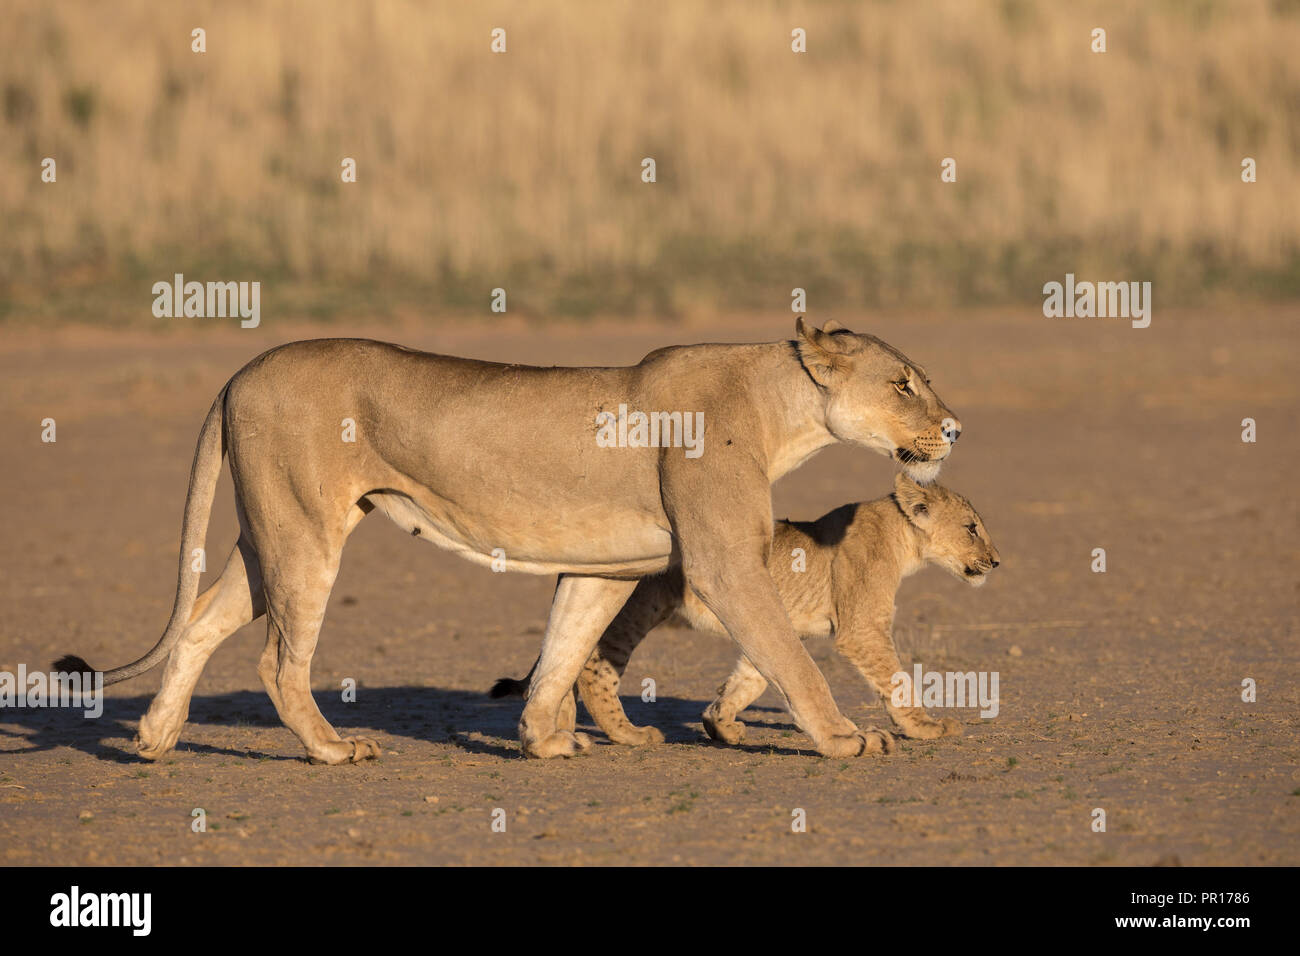 Lioness with cub (Panthera leo), Kgalagadi Transfrontier Park, South Africa, Africa Stock Photo